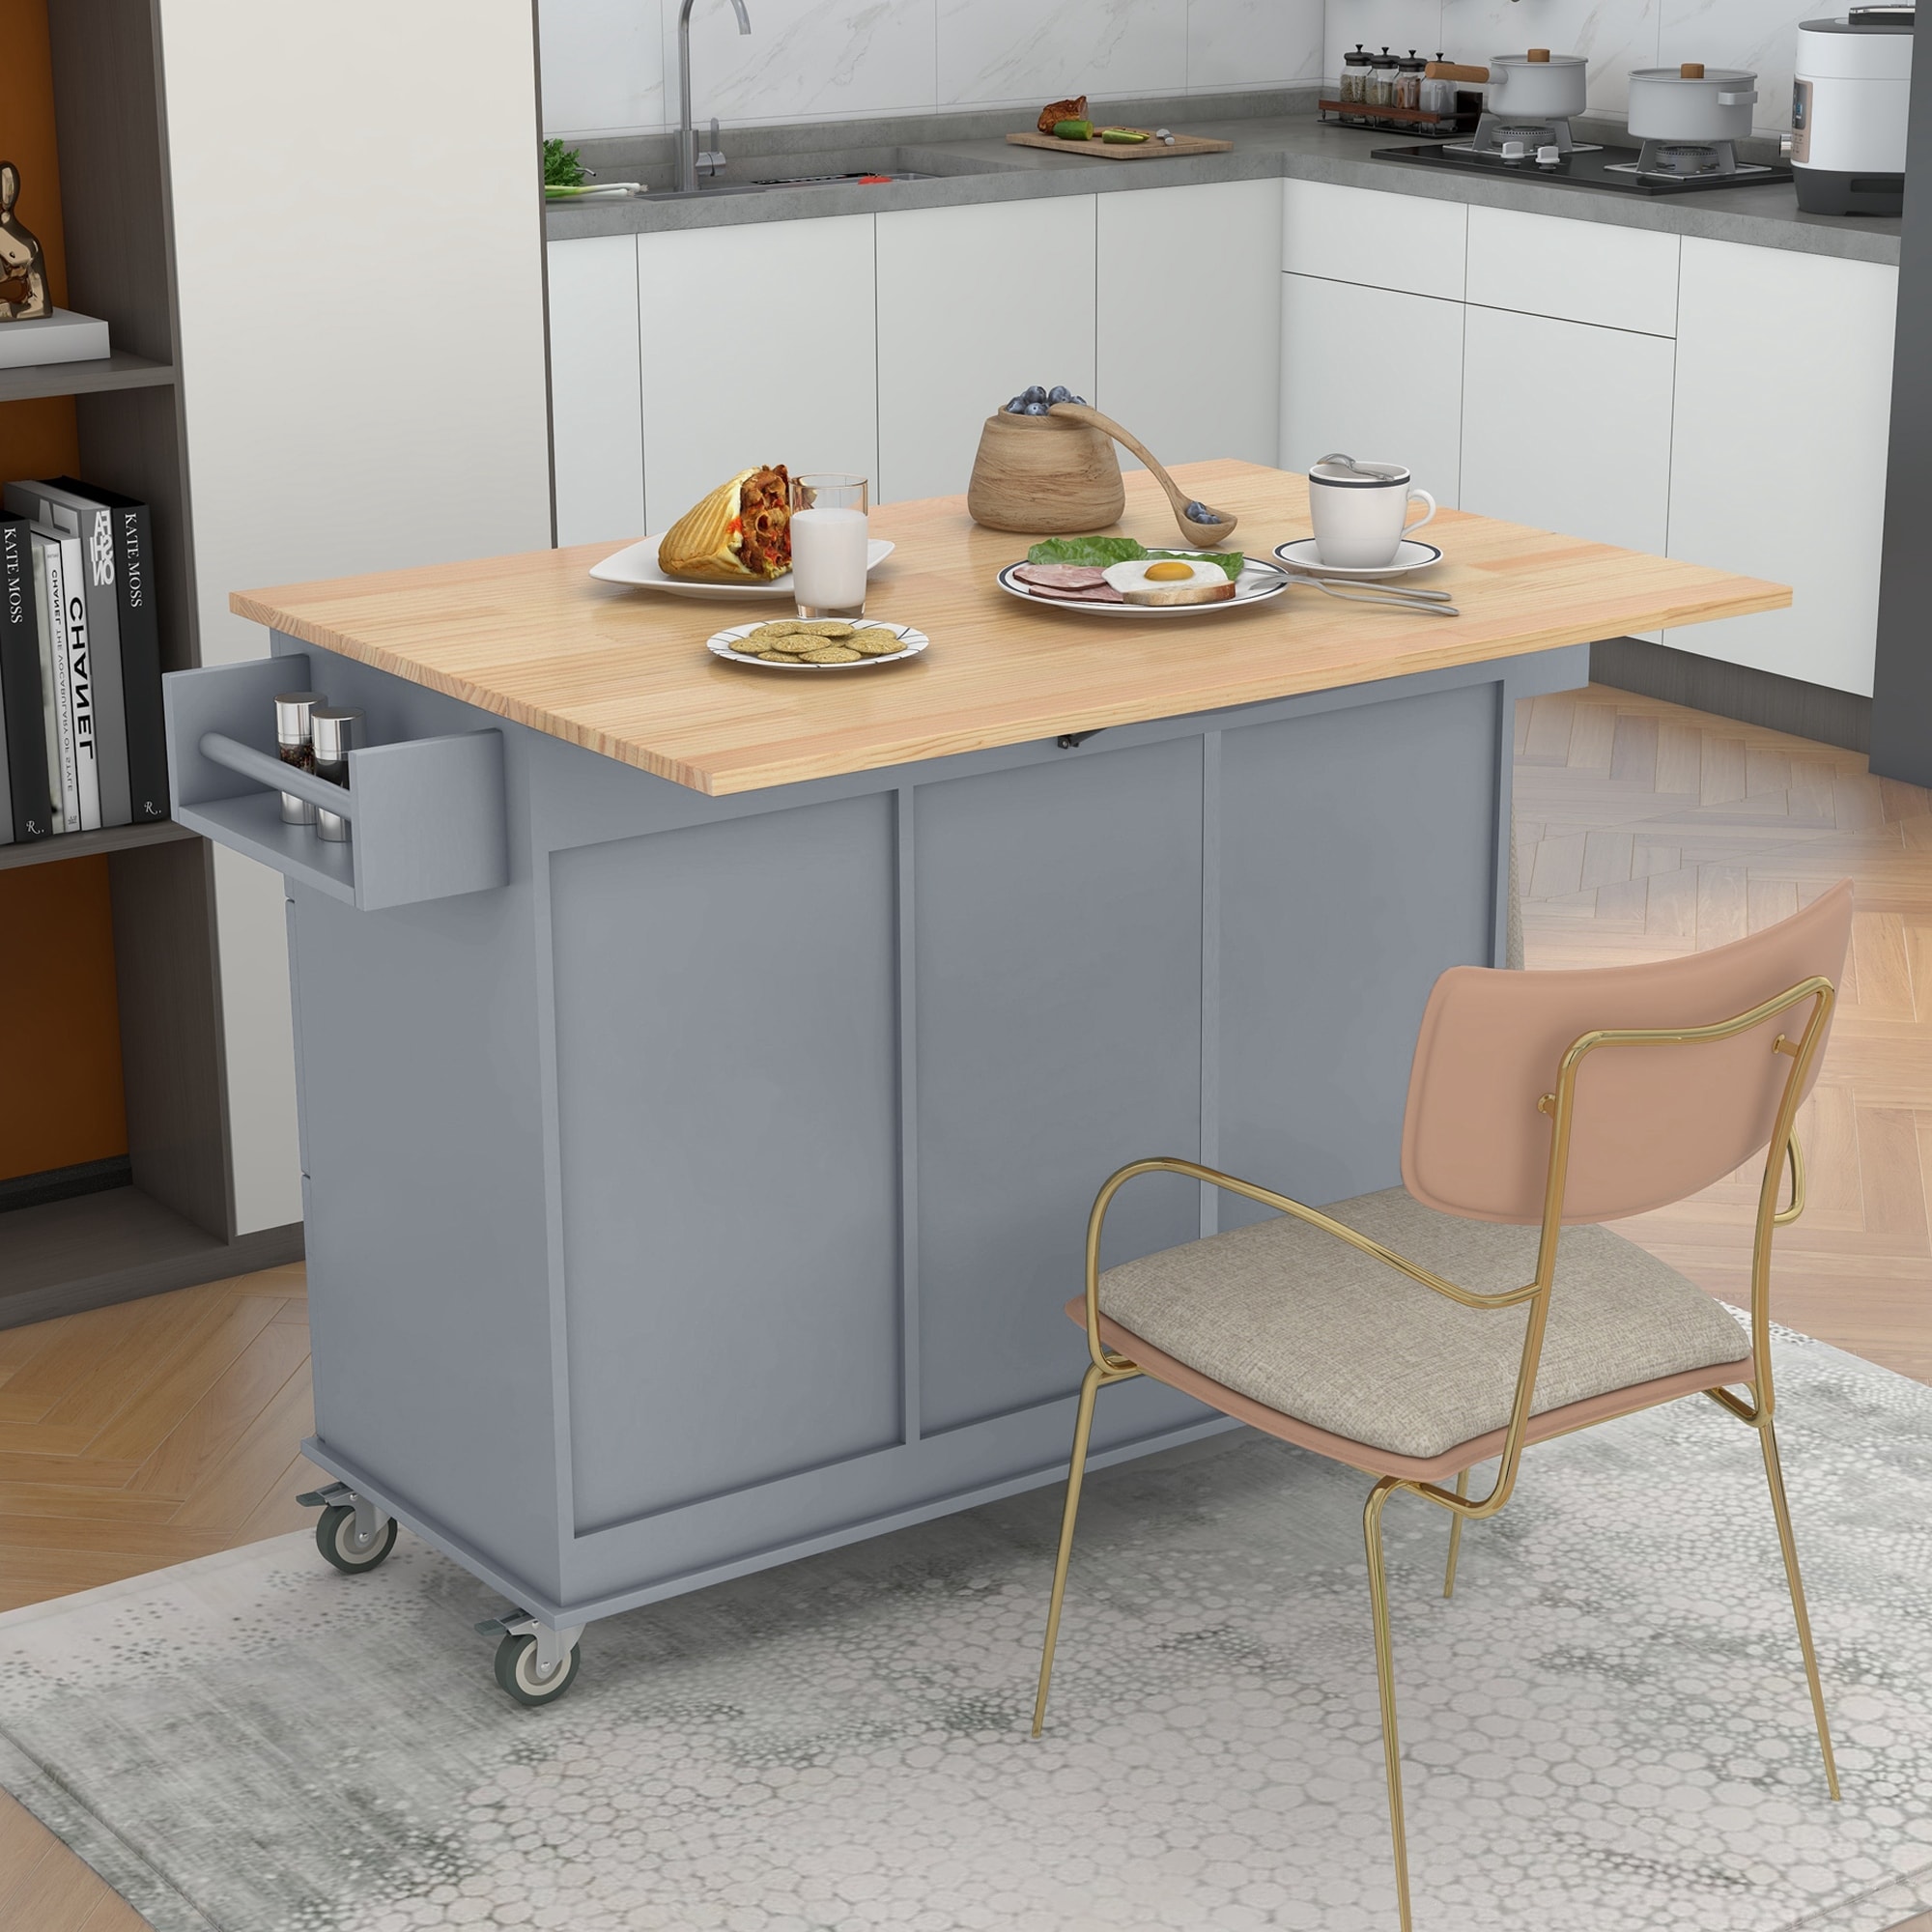 https://ak1.ostkcdn.com/images/products/is/images/direct/8ad8f9babc1d7d729a77f20b72d980056bc5f062/Rolling-Mobile-Kitchen-Island-Modern-Storage-Cabinet-and-Drop-Leaf-Breakfast-Bar.jpg